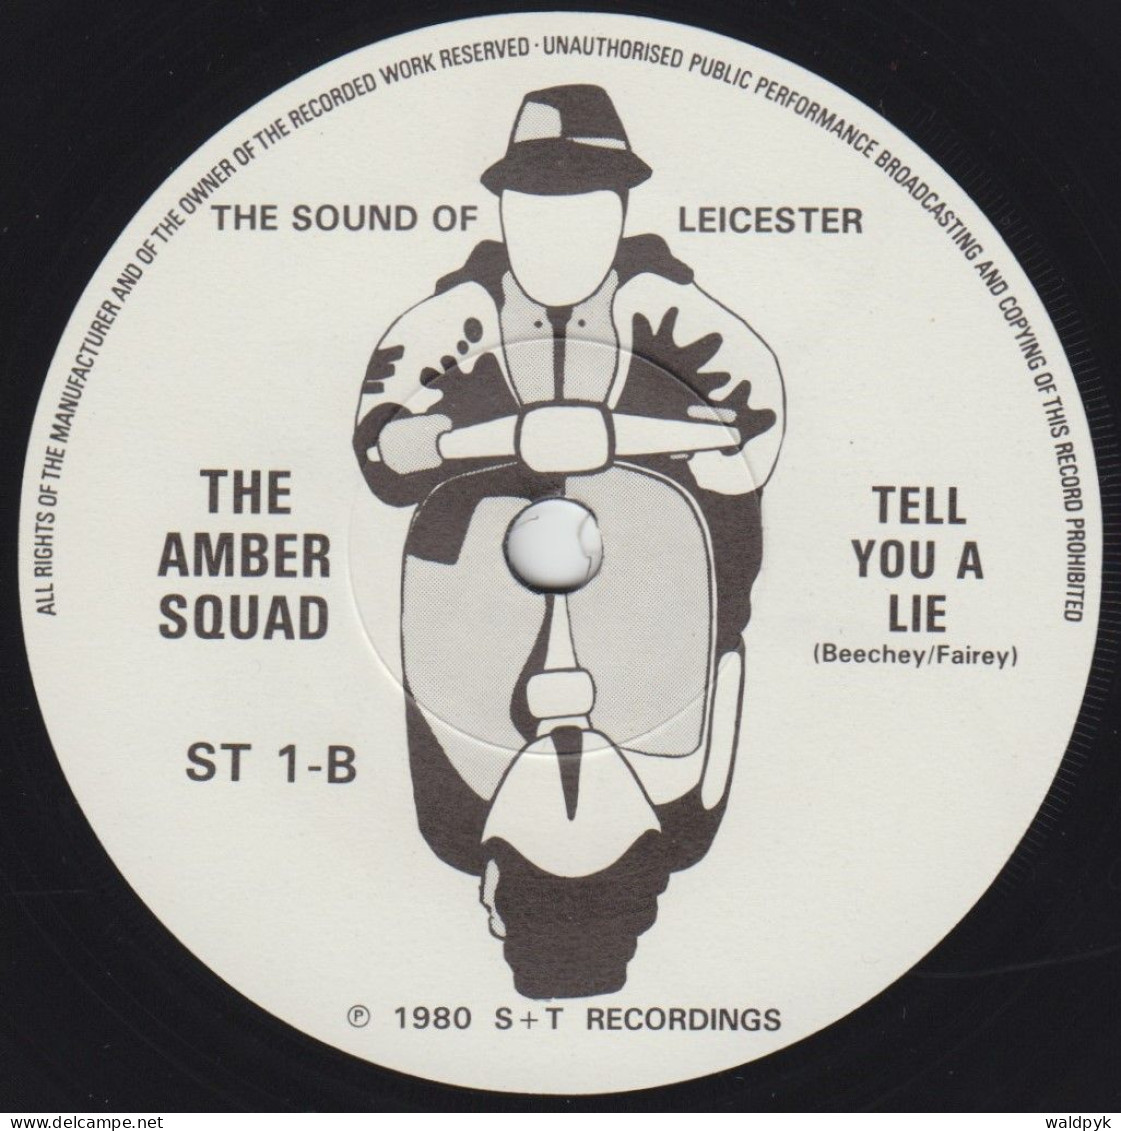 THE AMBER SQUAD - I Can't Put My Finger On You - Altri - Inglese